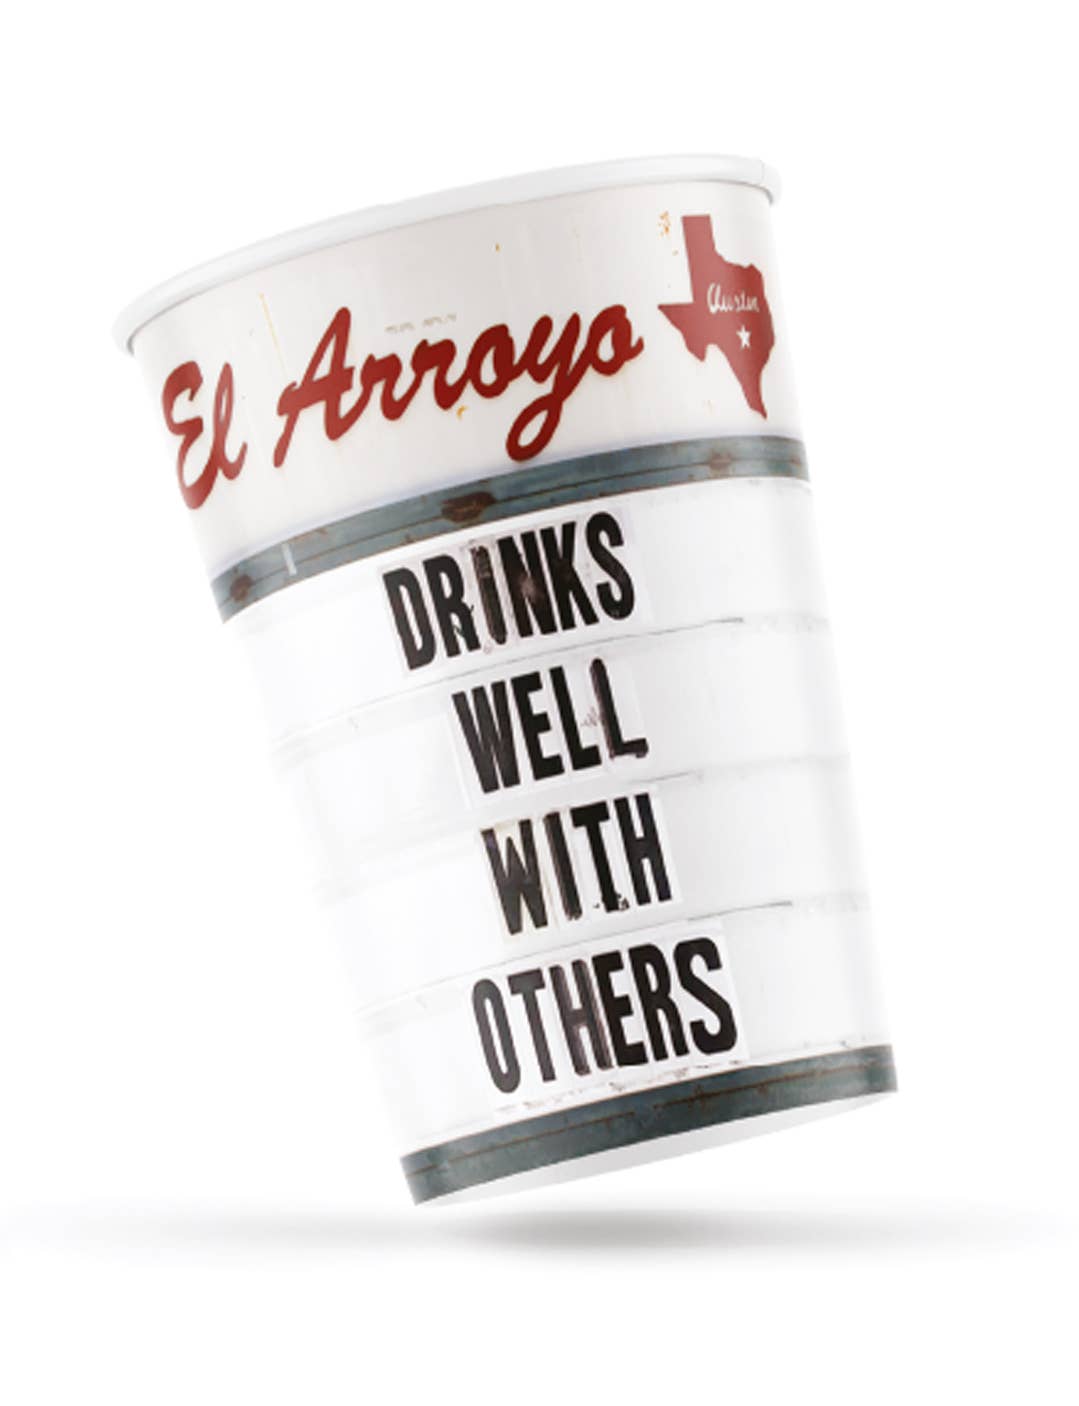 El Arroyo - 12 oz Party Cups (Pack of 12) - Drinks Well